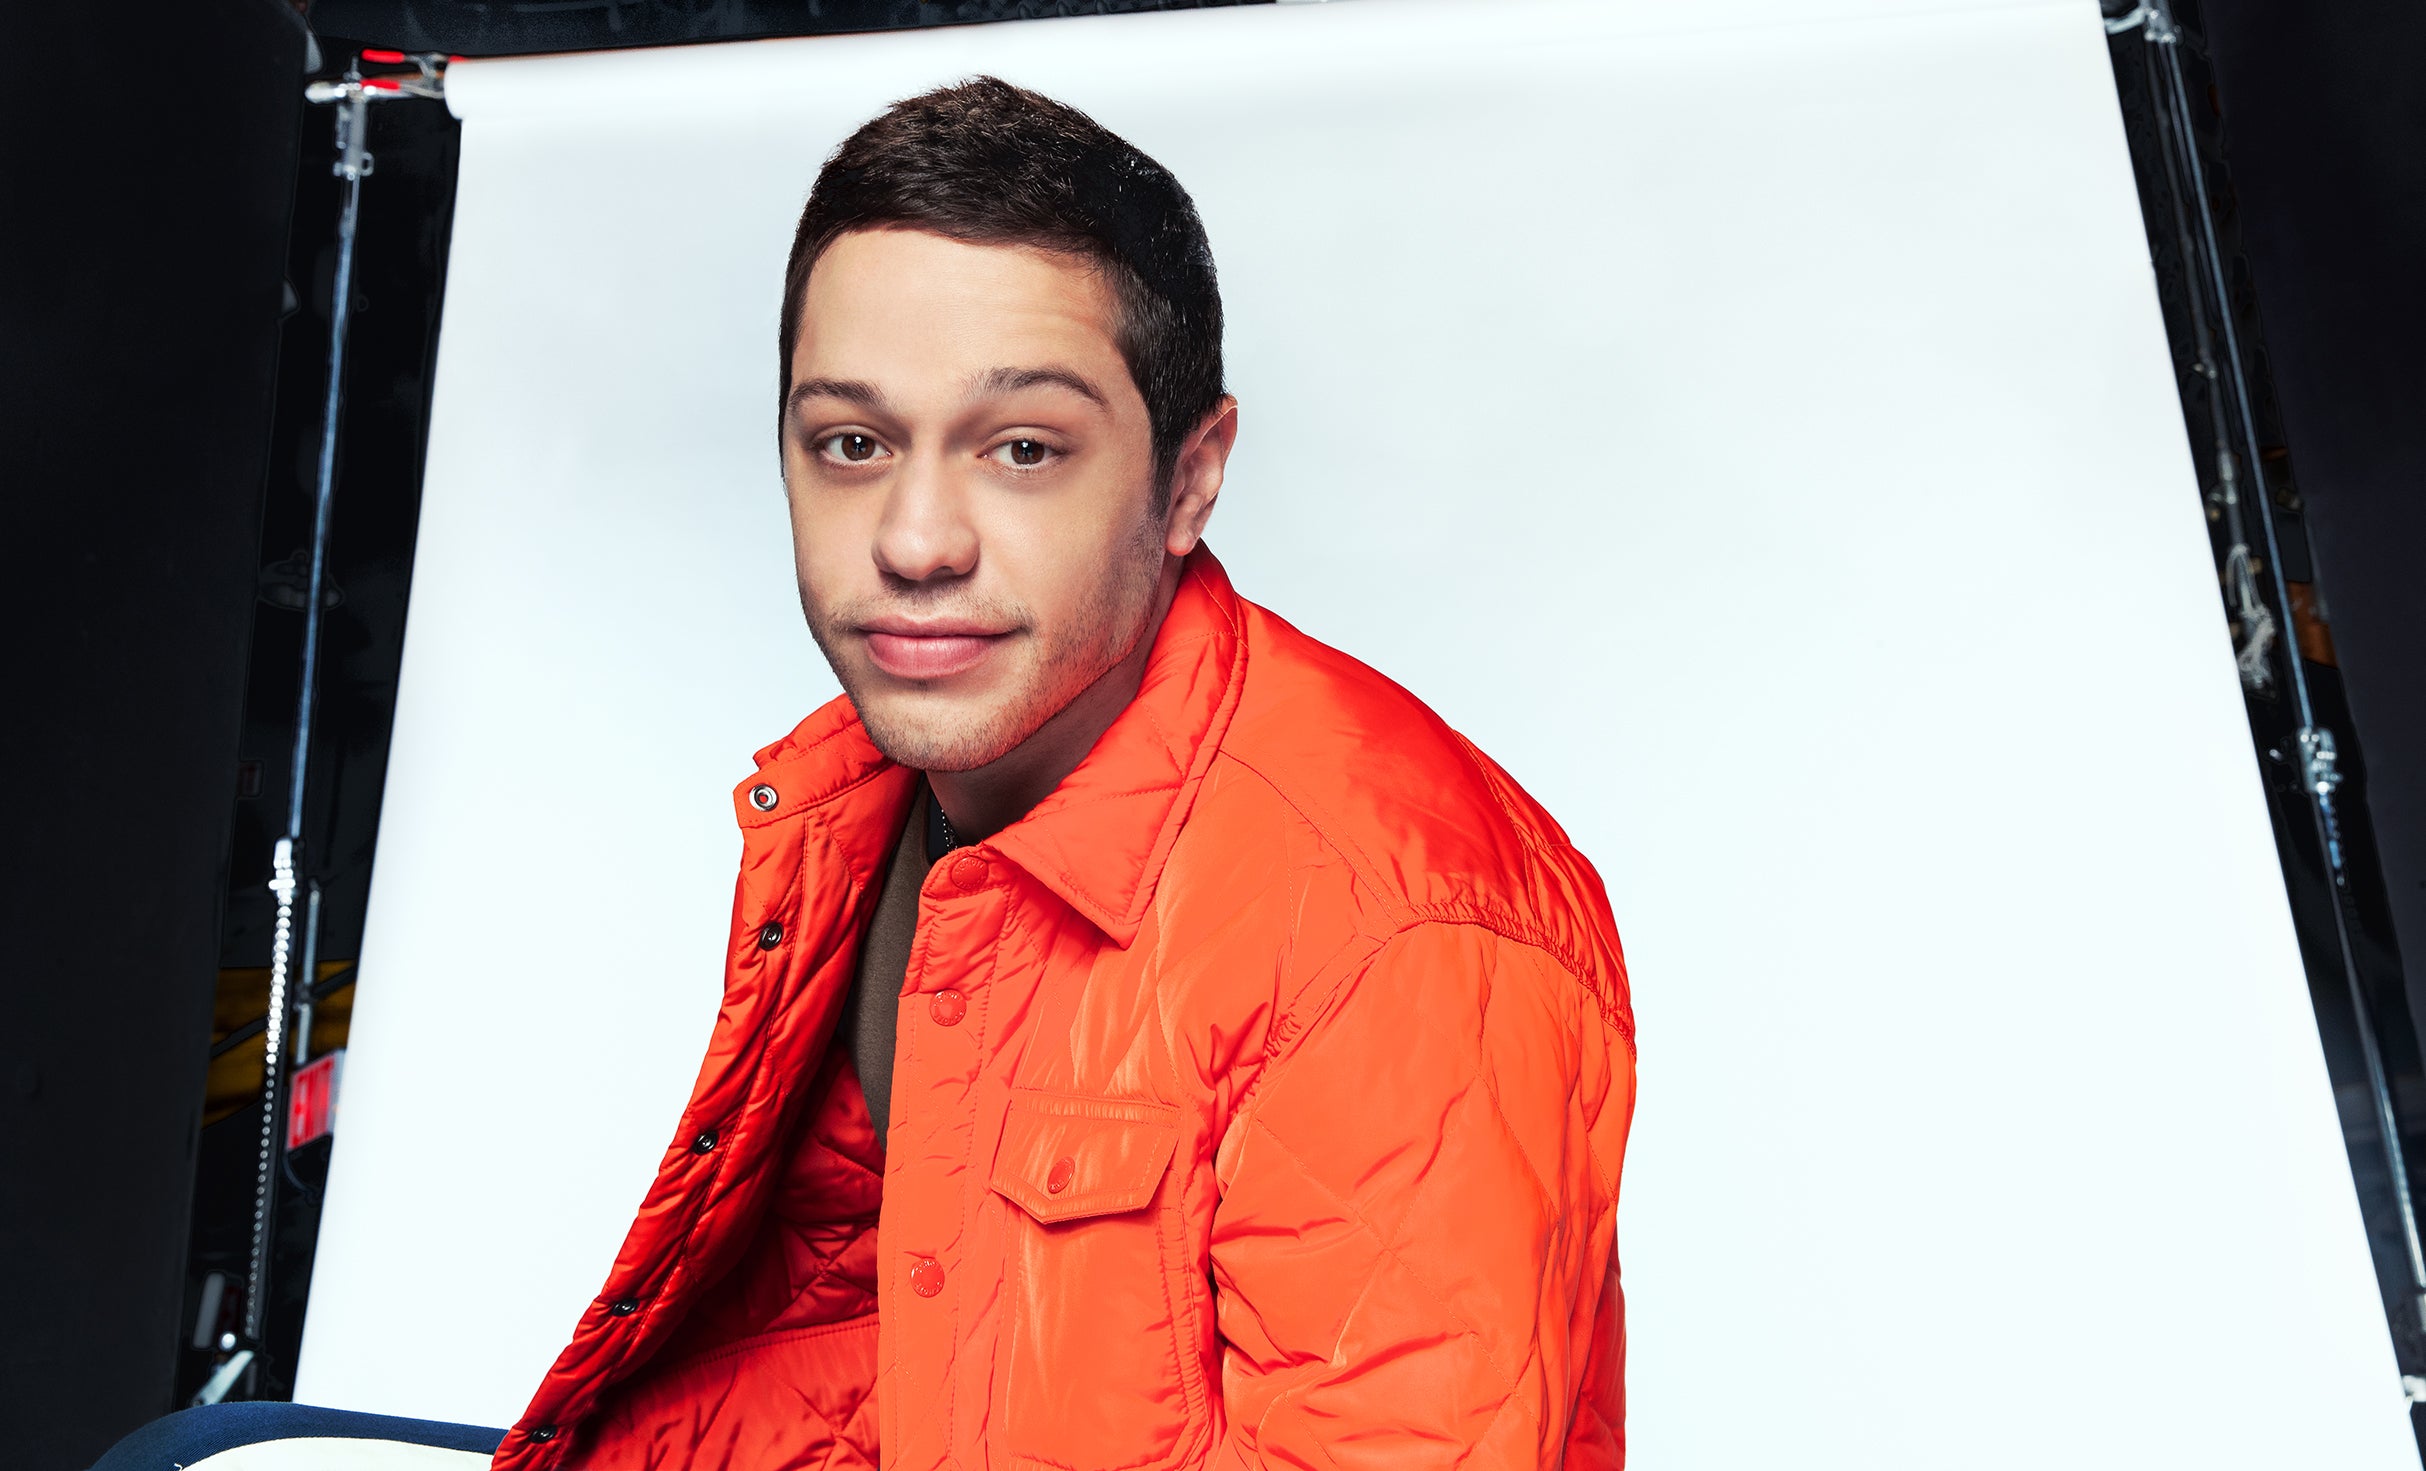 working presale password for Pete Davidson Prehab Tour face value tickets in Niagara Falls at OLG Stage at Fallsview Casino